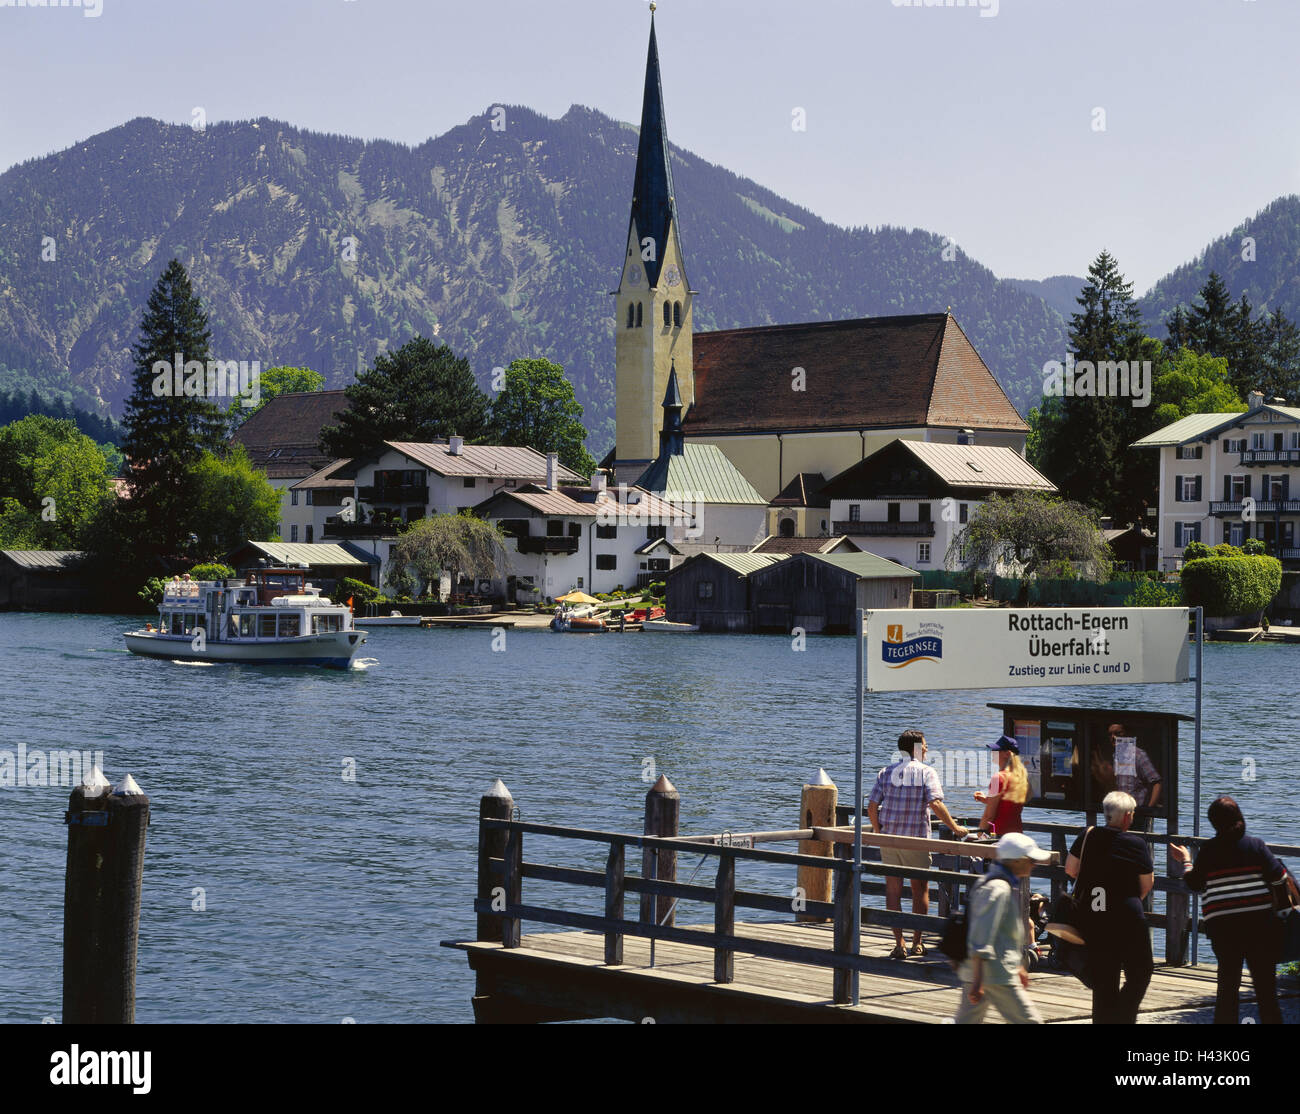 Germany, Upper Bavaria, to Rottach-Egern, landing stage, tourists, Tegernsee, South Germany, Bavaria, destination, place of interest, tourist attraction, boat trip, boat excursion, boat investor, bridge, wooden jetty, landing stage, building, church, stee Stock Photo